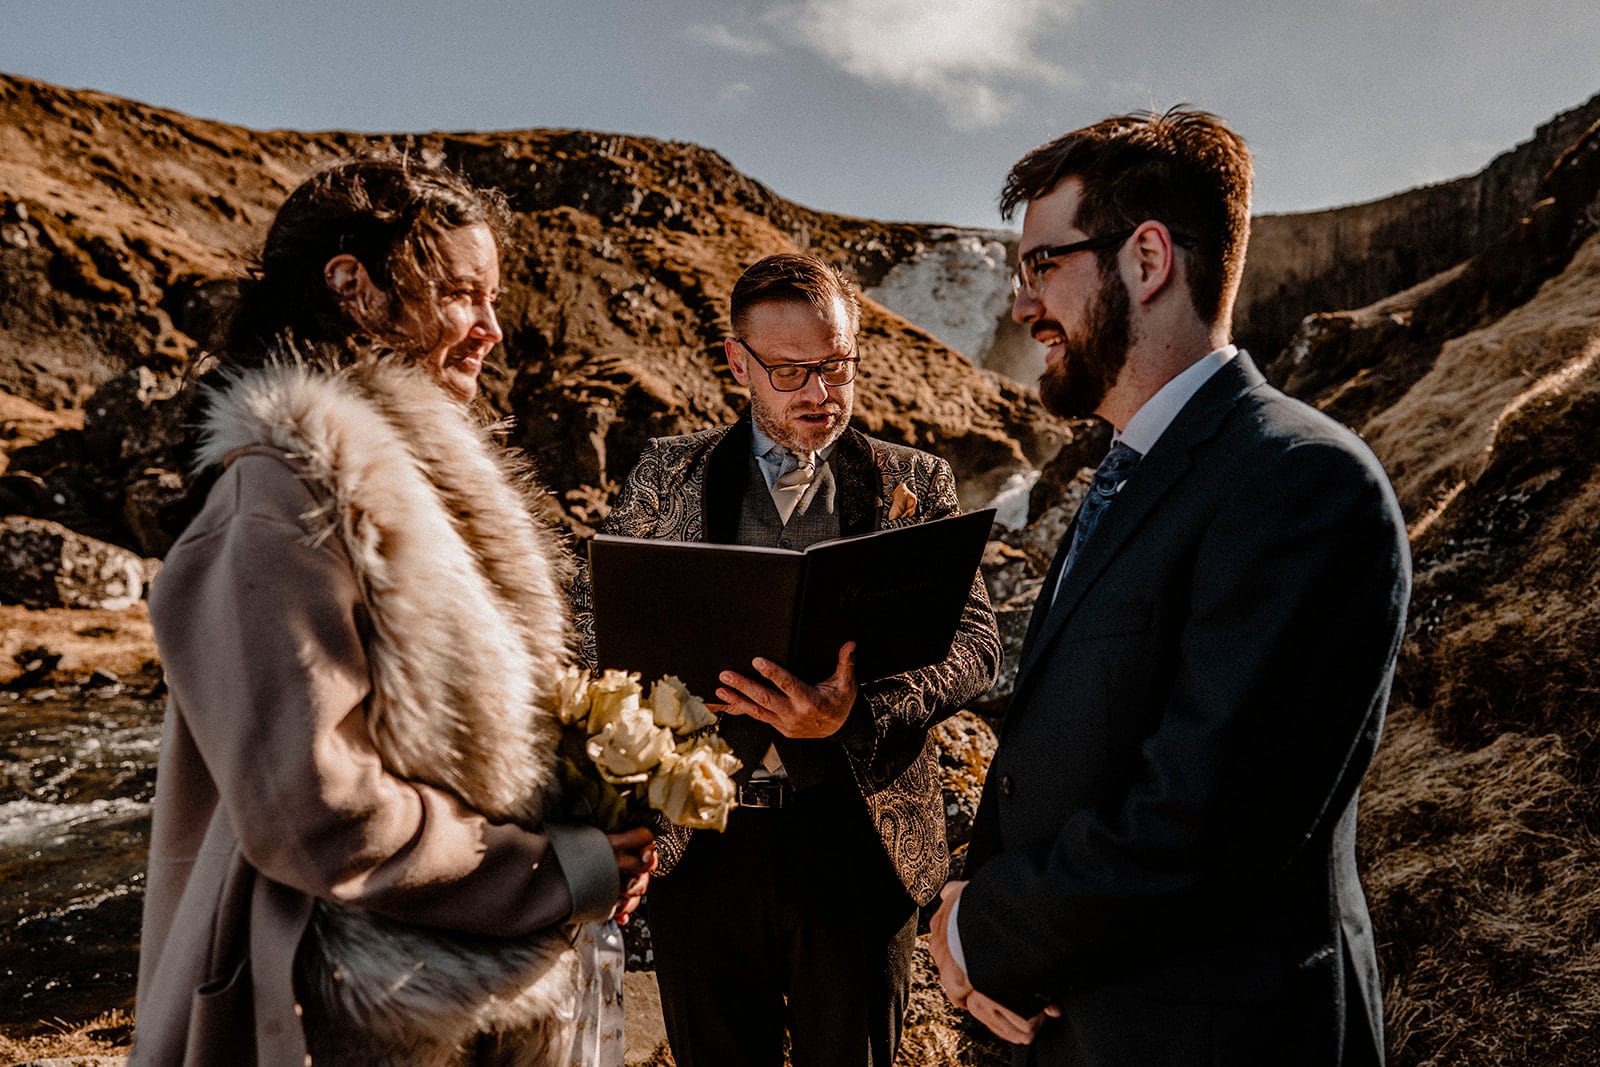 Nature's Blessing: Bride and Groom Amidst Western Iceland's Wonders